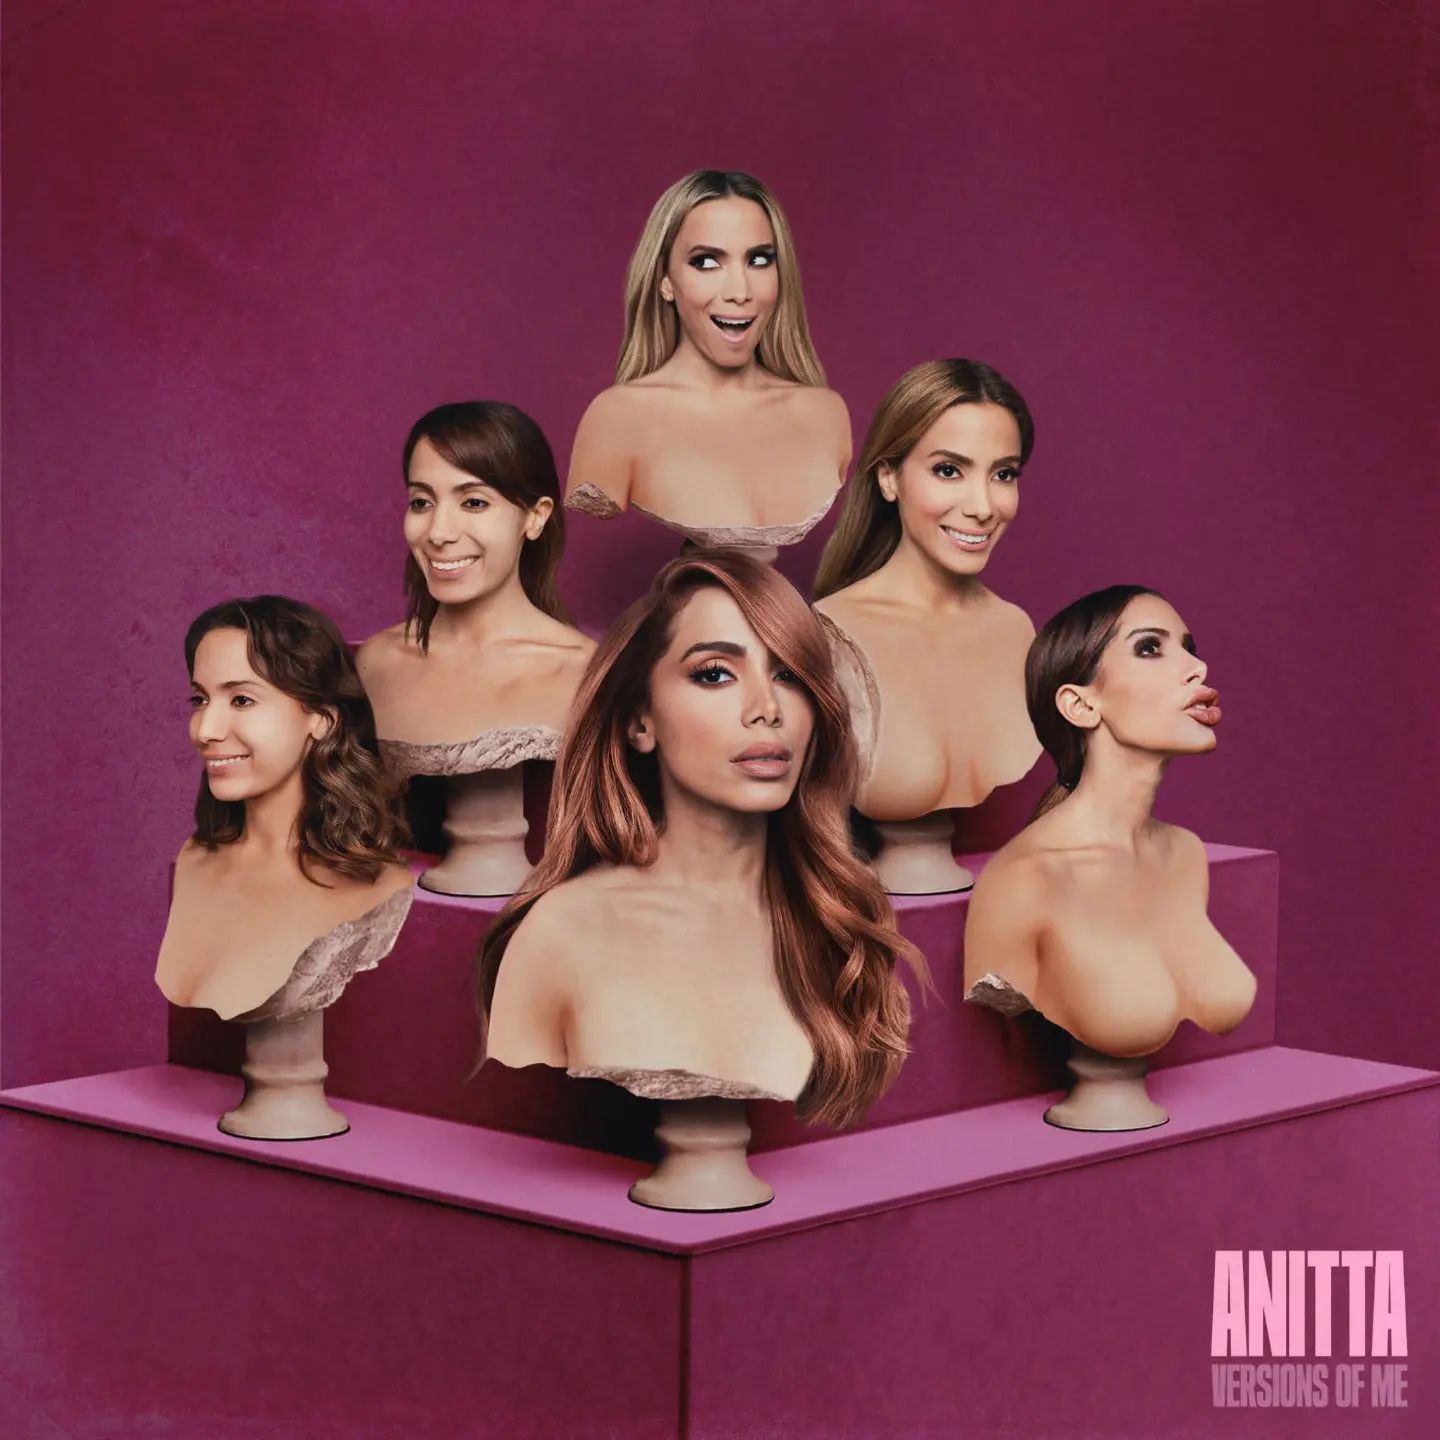 Versions of Me, new album by Anitta (Disclosure)